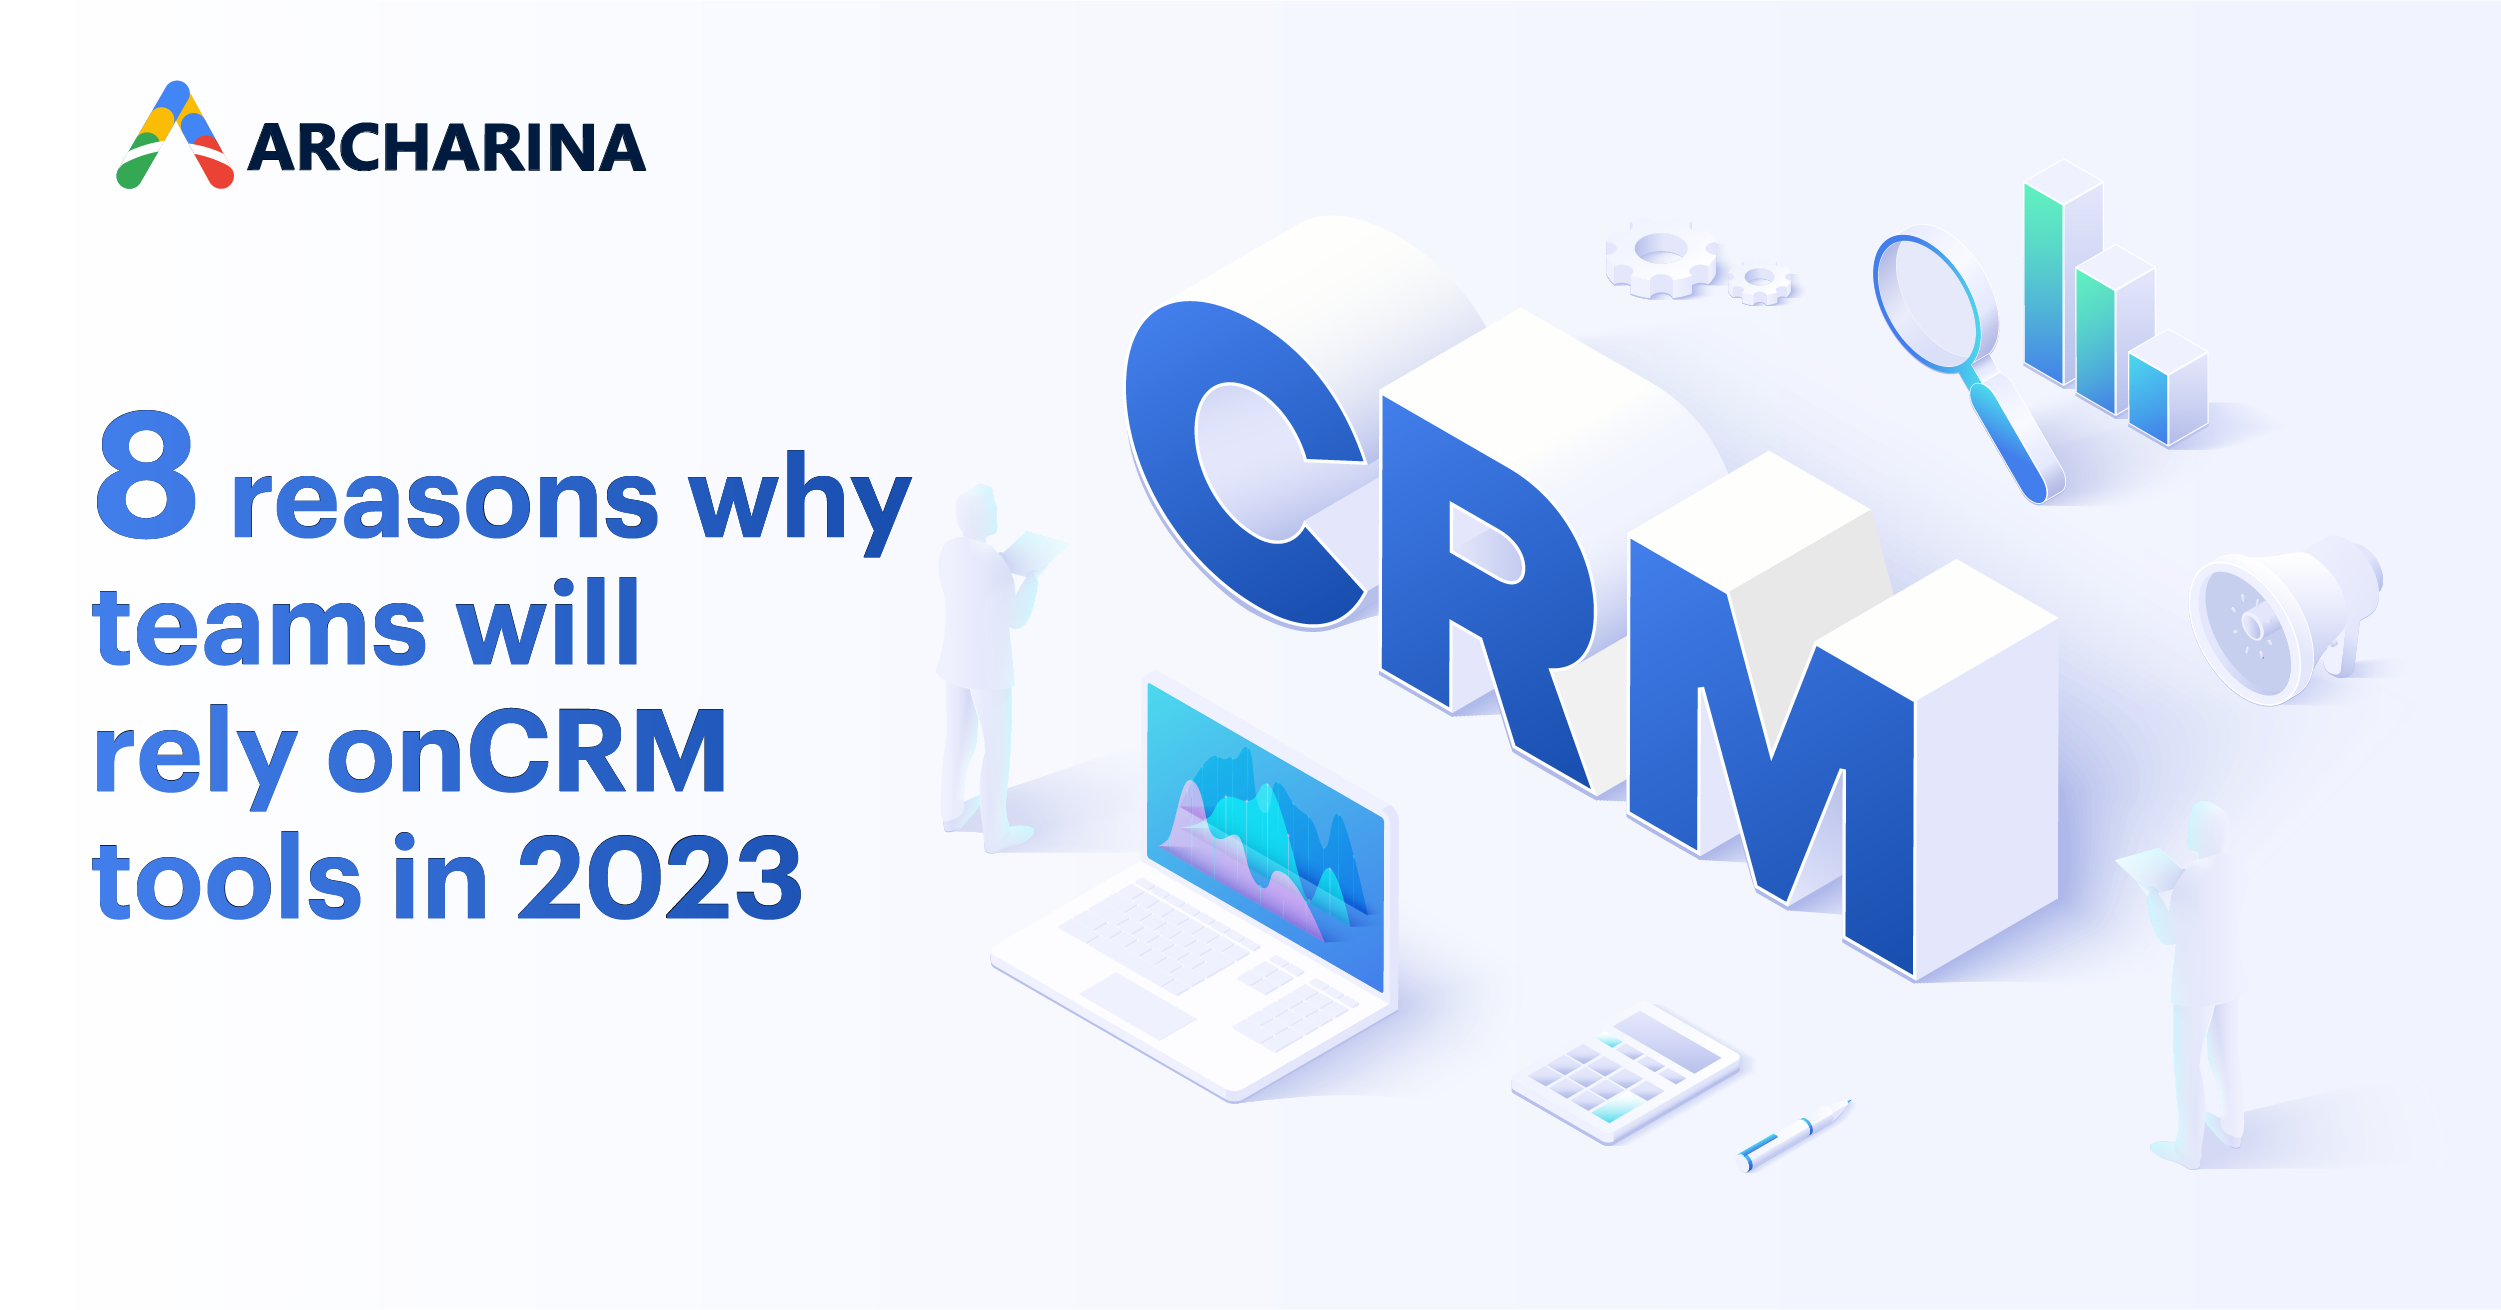 8-reasons-why-teams-will-rely-on-crm-tools-in-2023